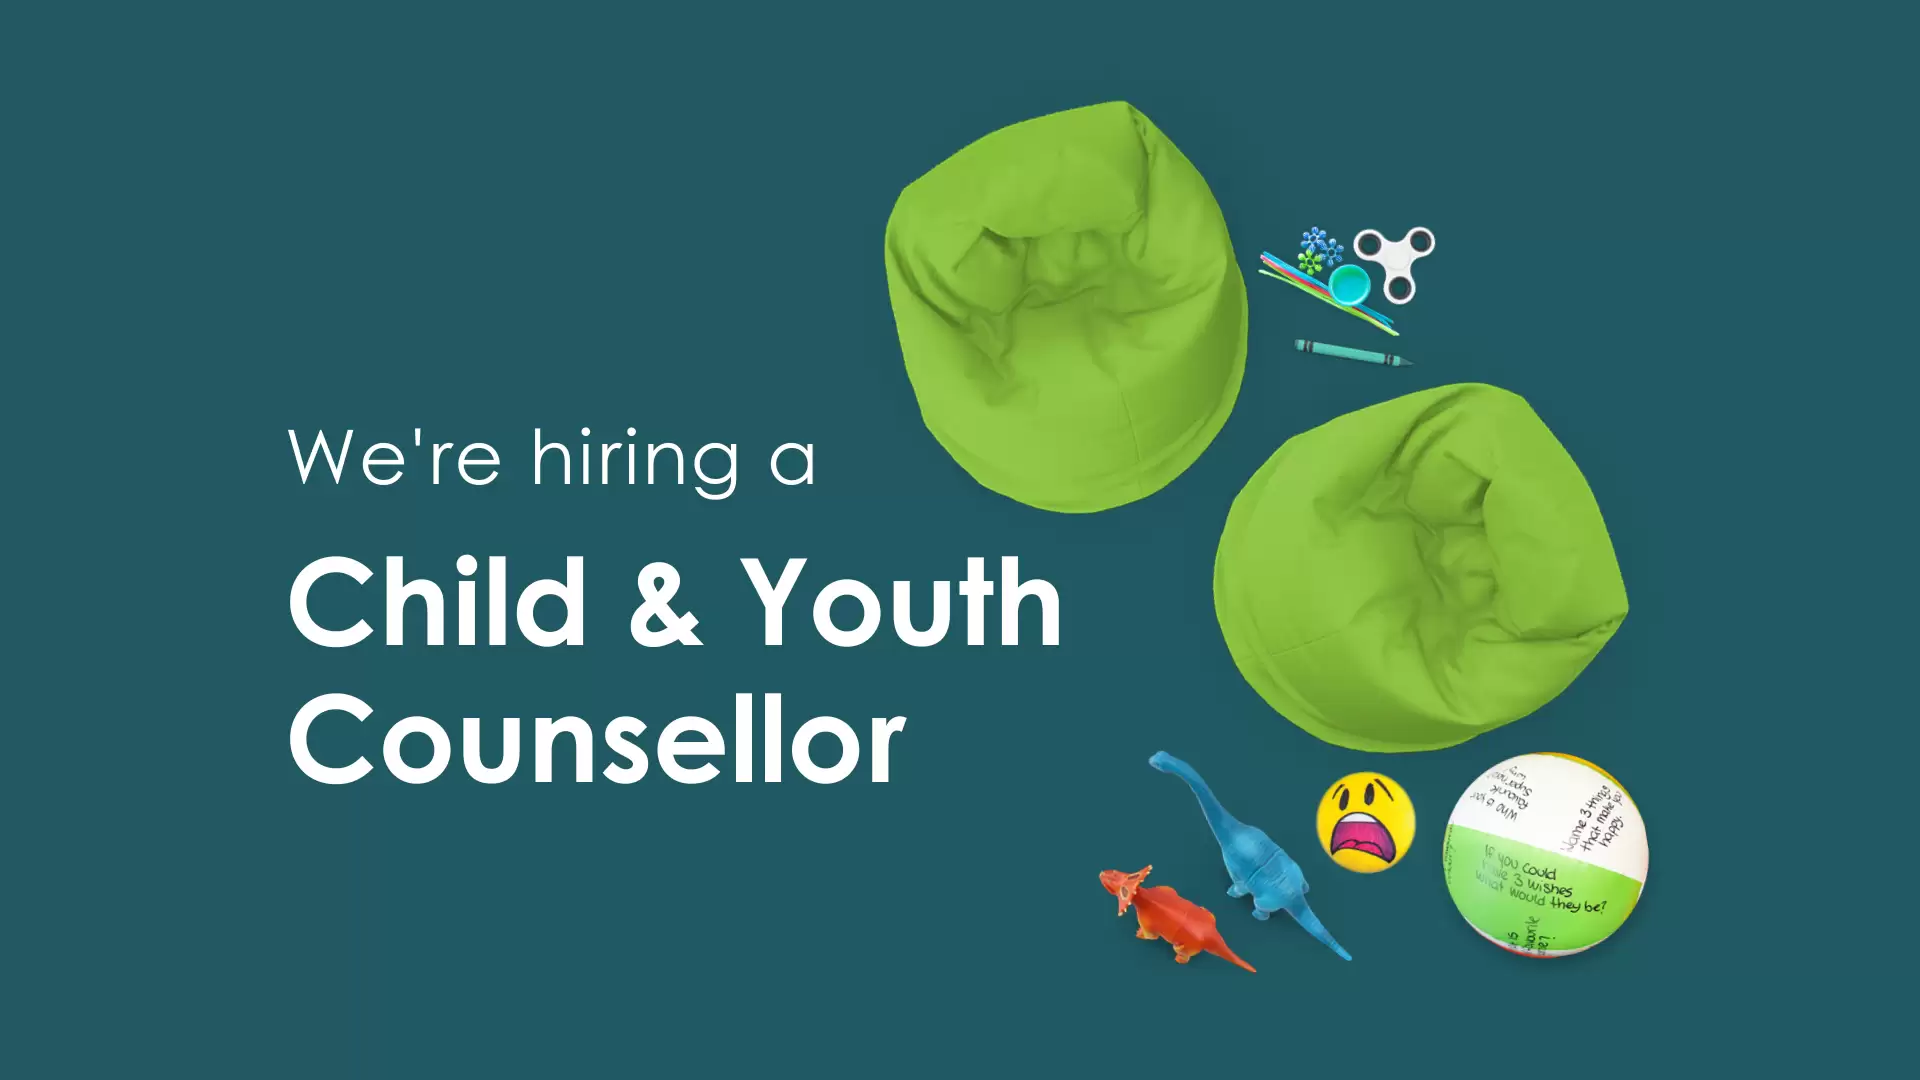 Dark green background with two lime green bean bag chairs, dinosaur figurines, and fidget toys. Text says "We're hiring a Child & Youth Counsellor"